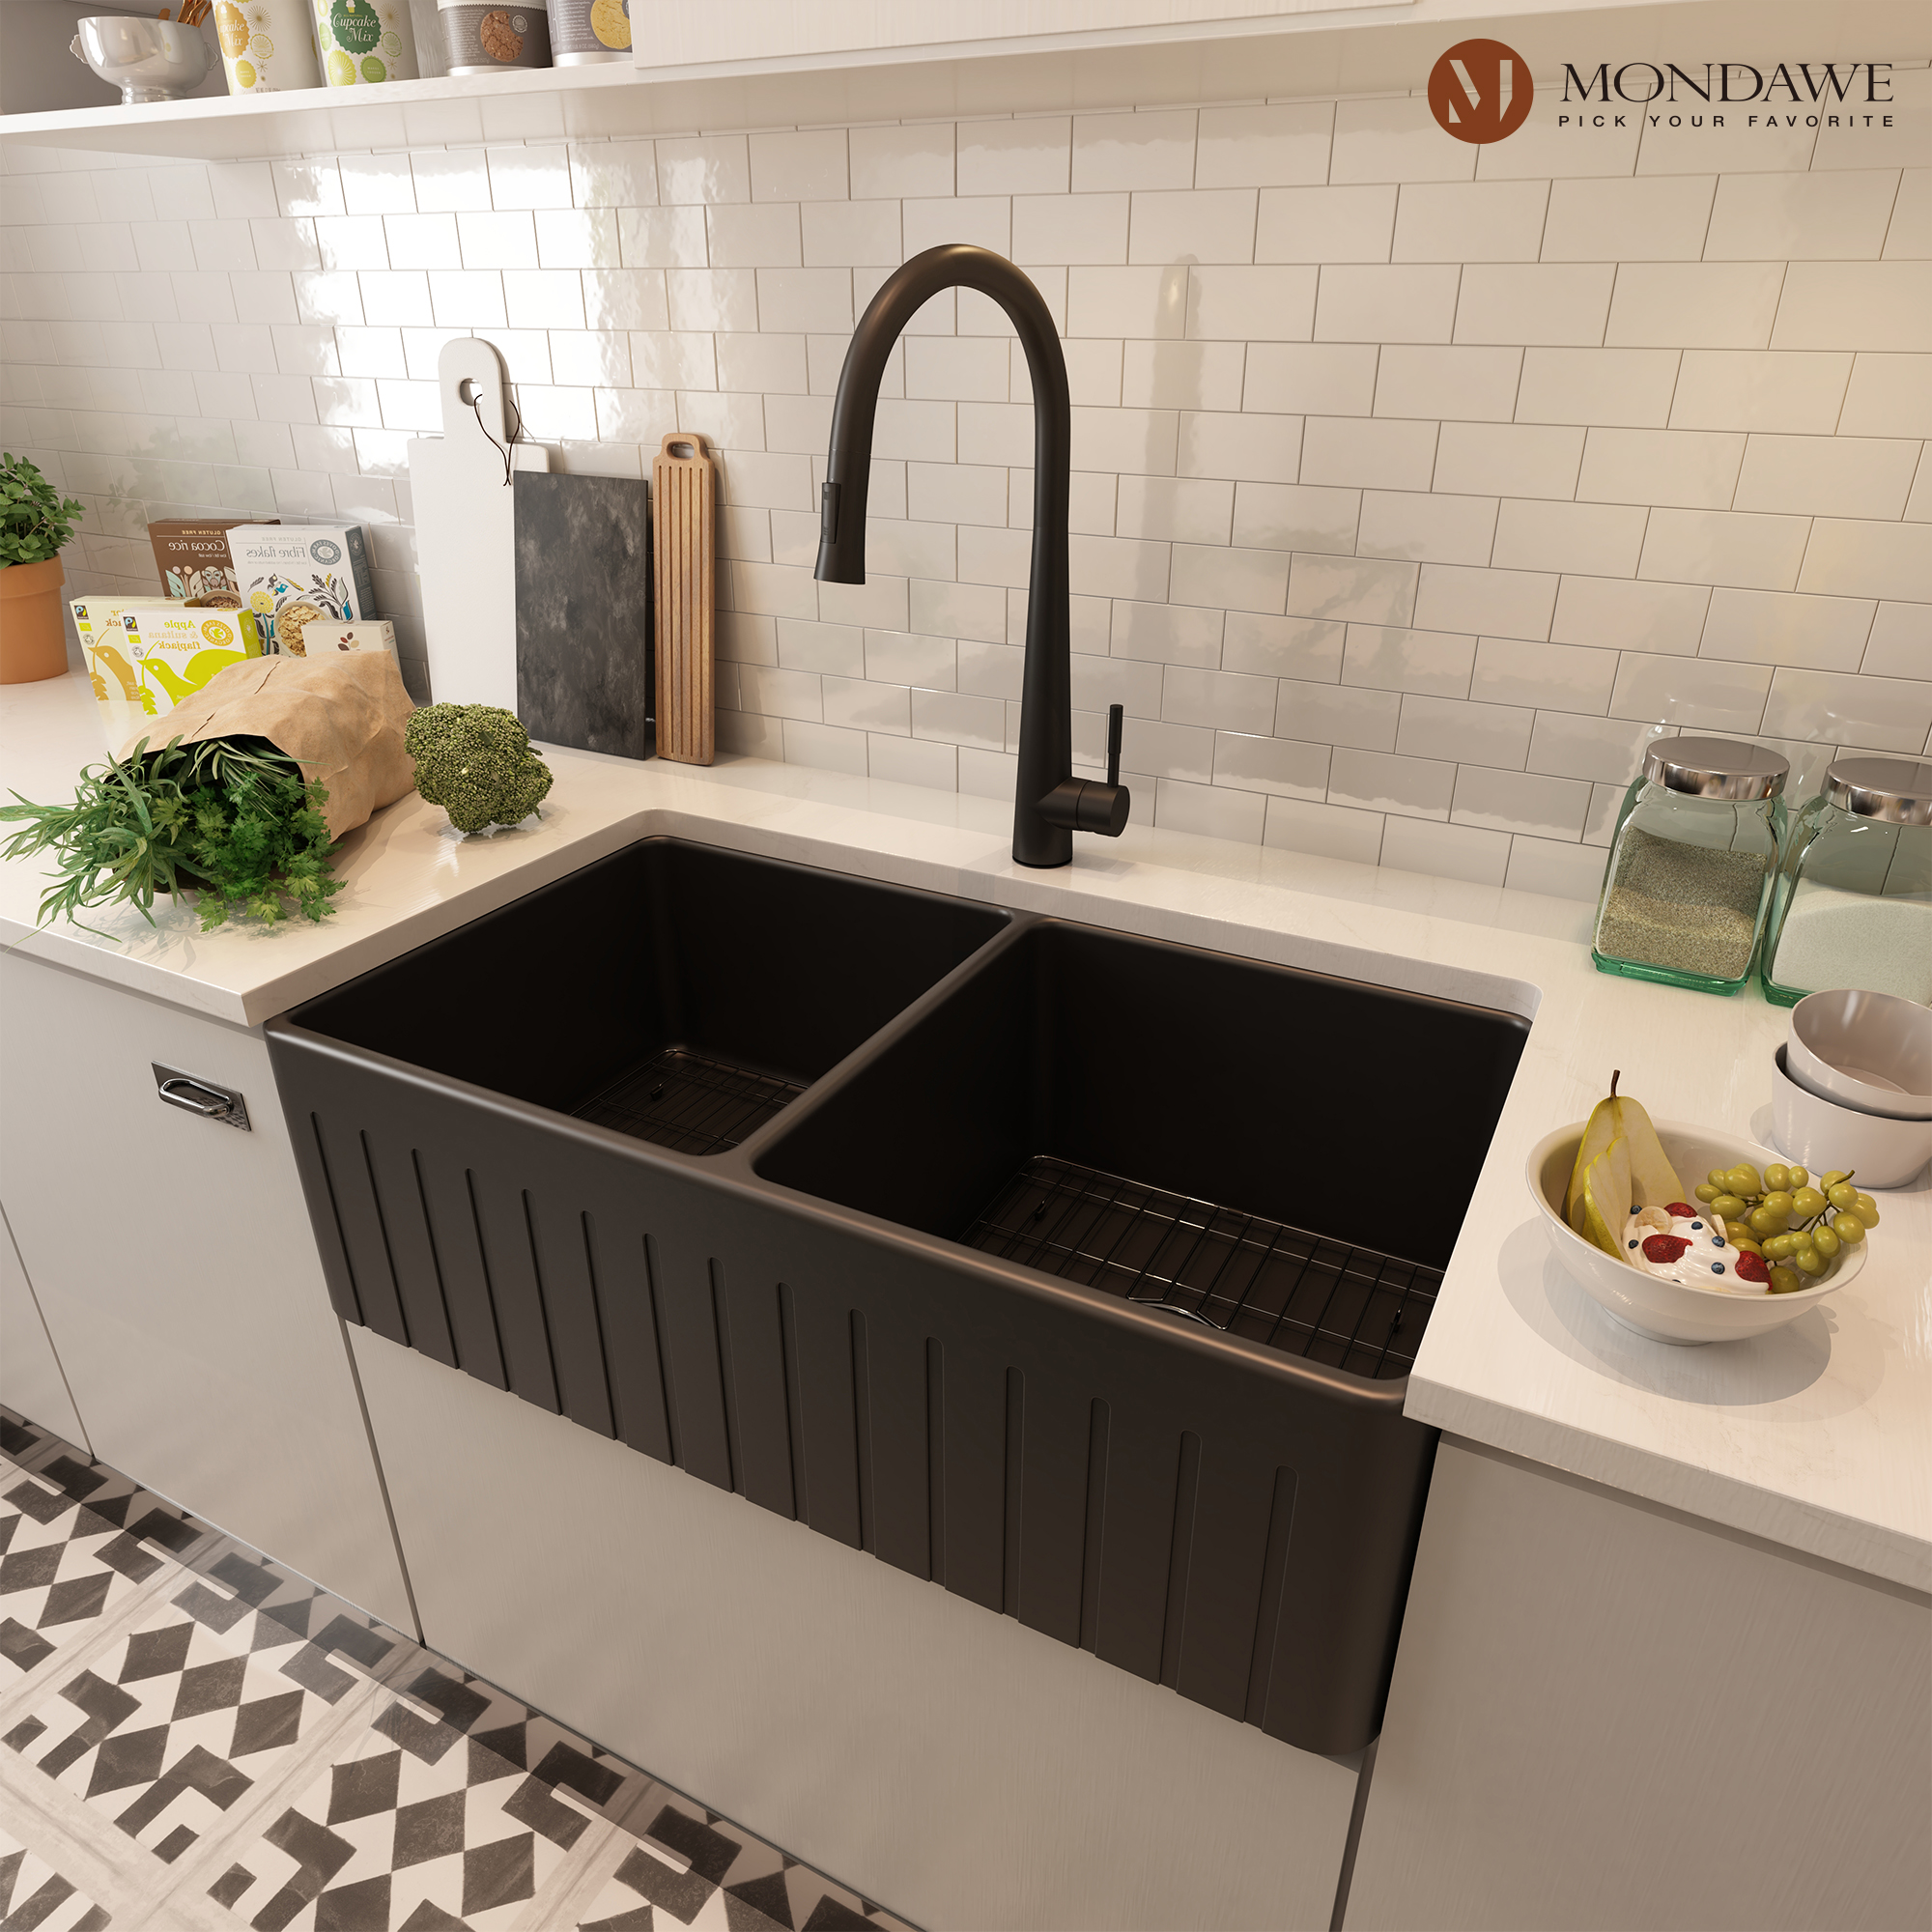 Farmhouse 30 in. matte black double bowl fireclay kitchen sink comes with pull-down faucet-Mondawe